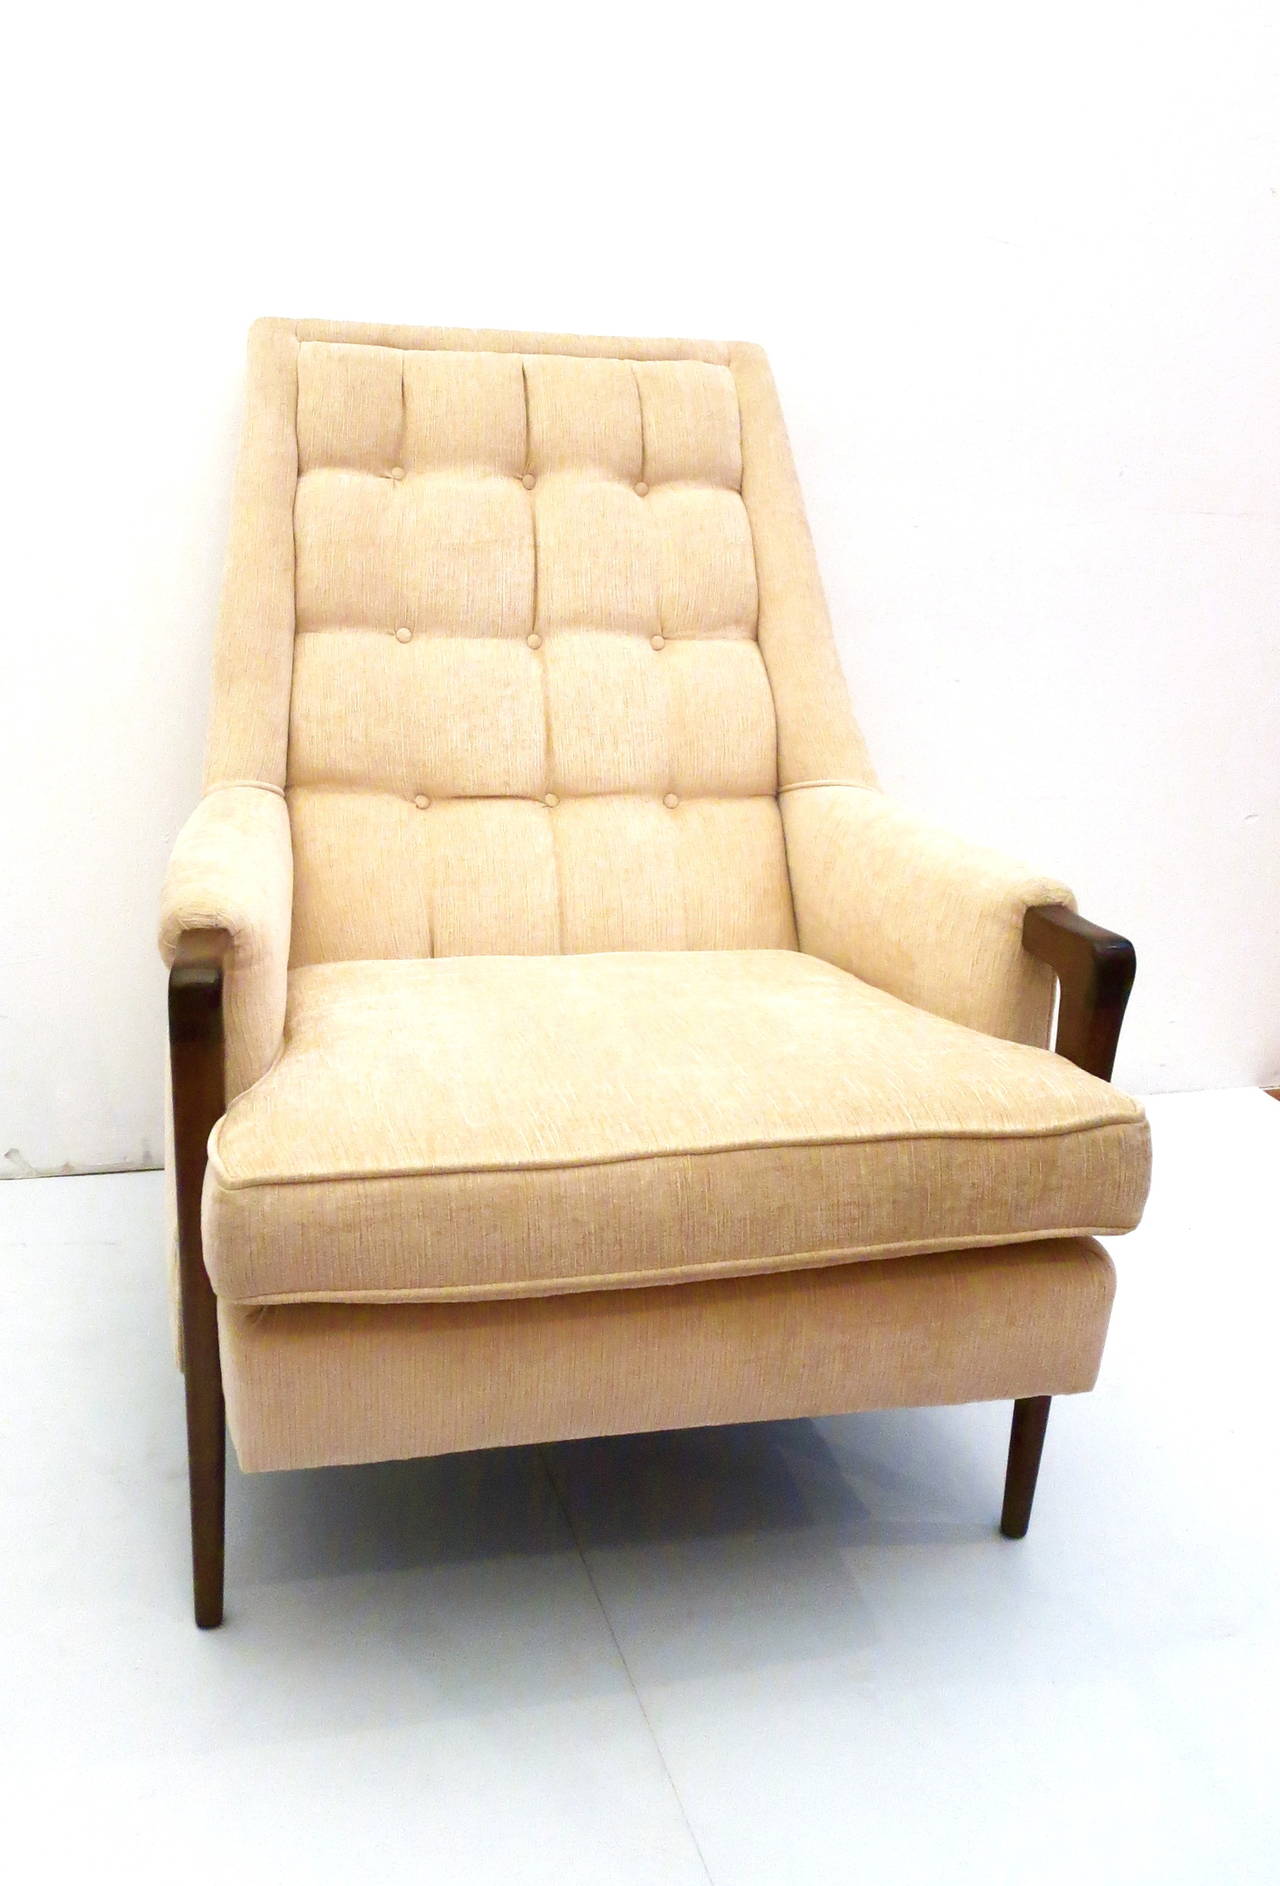 Elegant tall back Italian armchair in the style of Gio Ponti, circa 1950s freshly recover and wood has been refinished in dark chocolate stain, solid mahogany, in cream tufted cotton velvety fabric, solid and sturdy great lines.